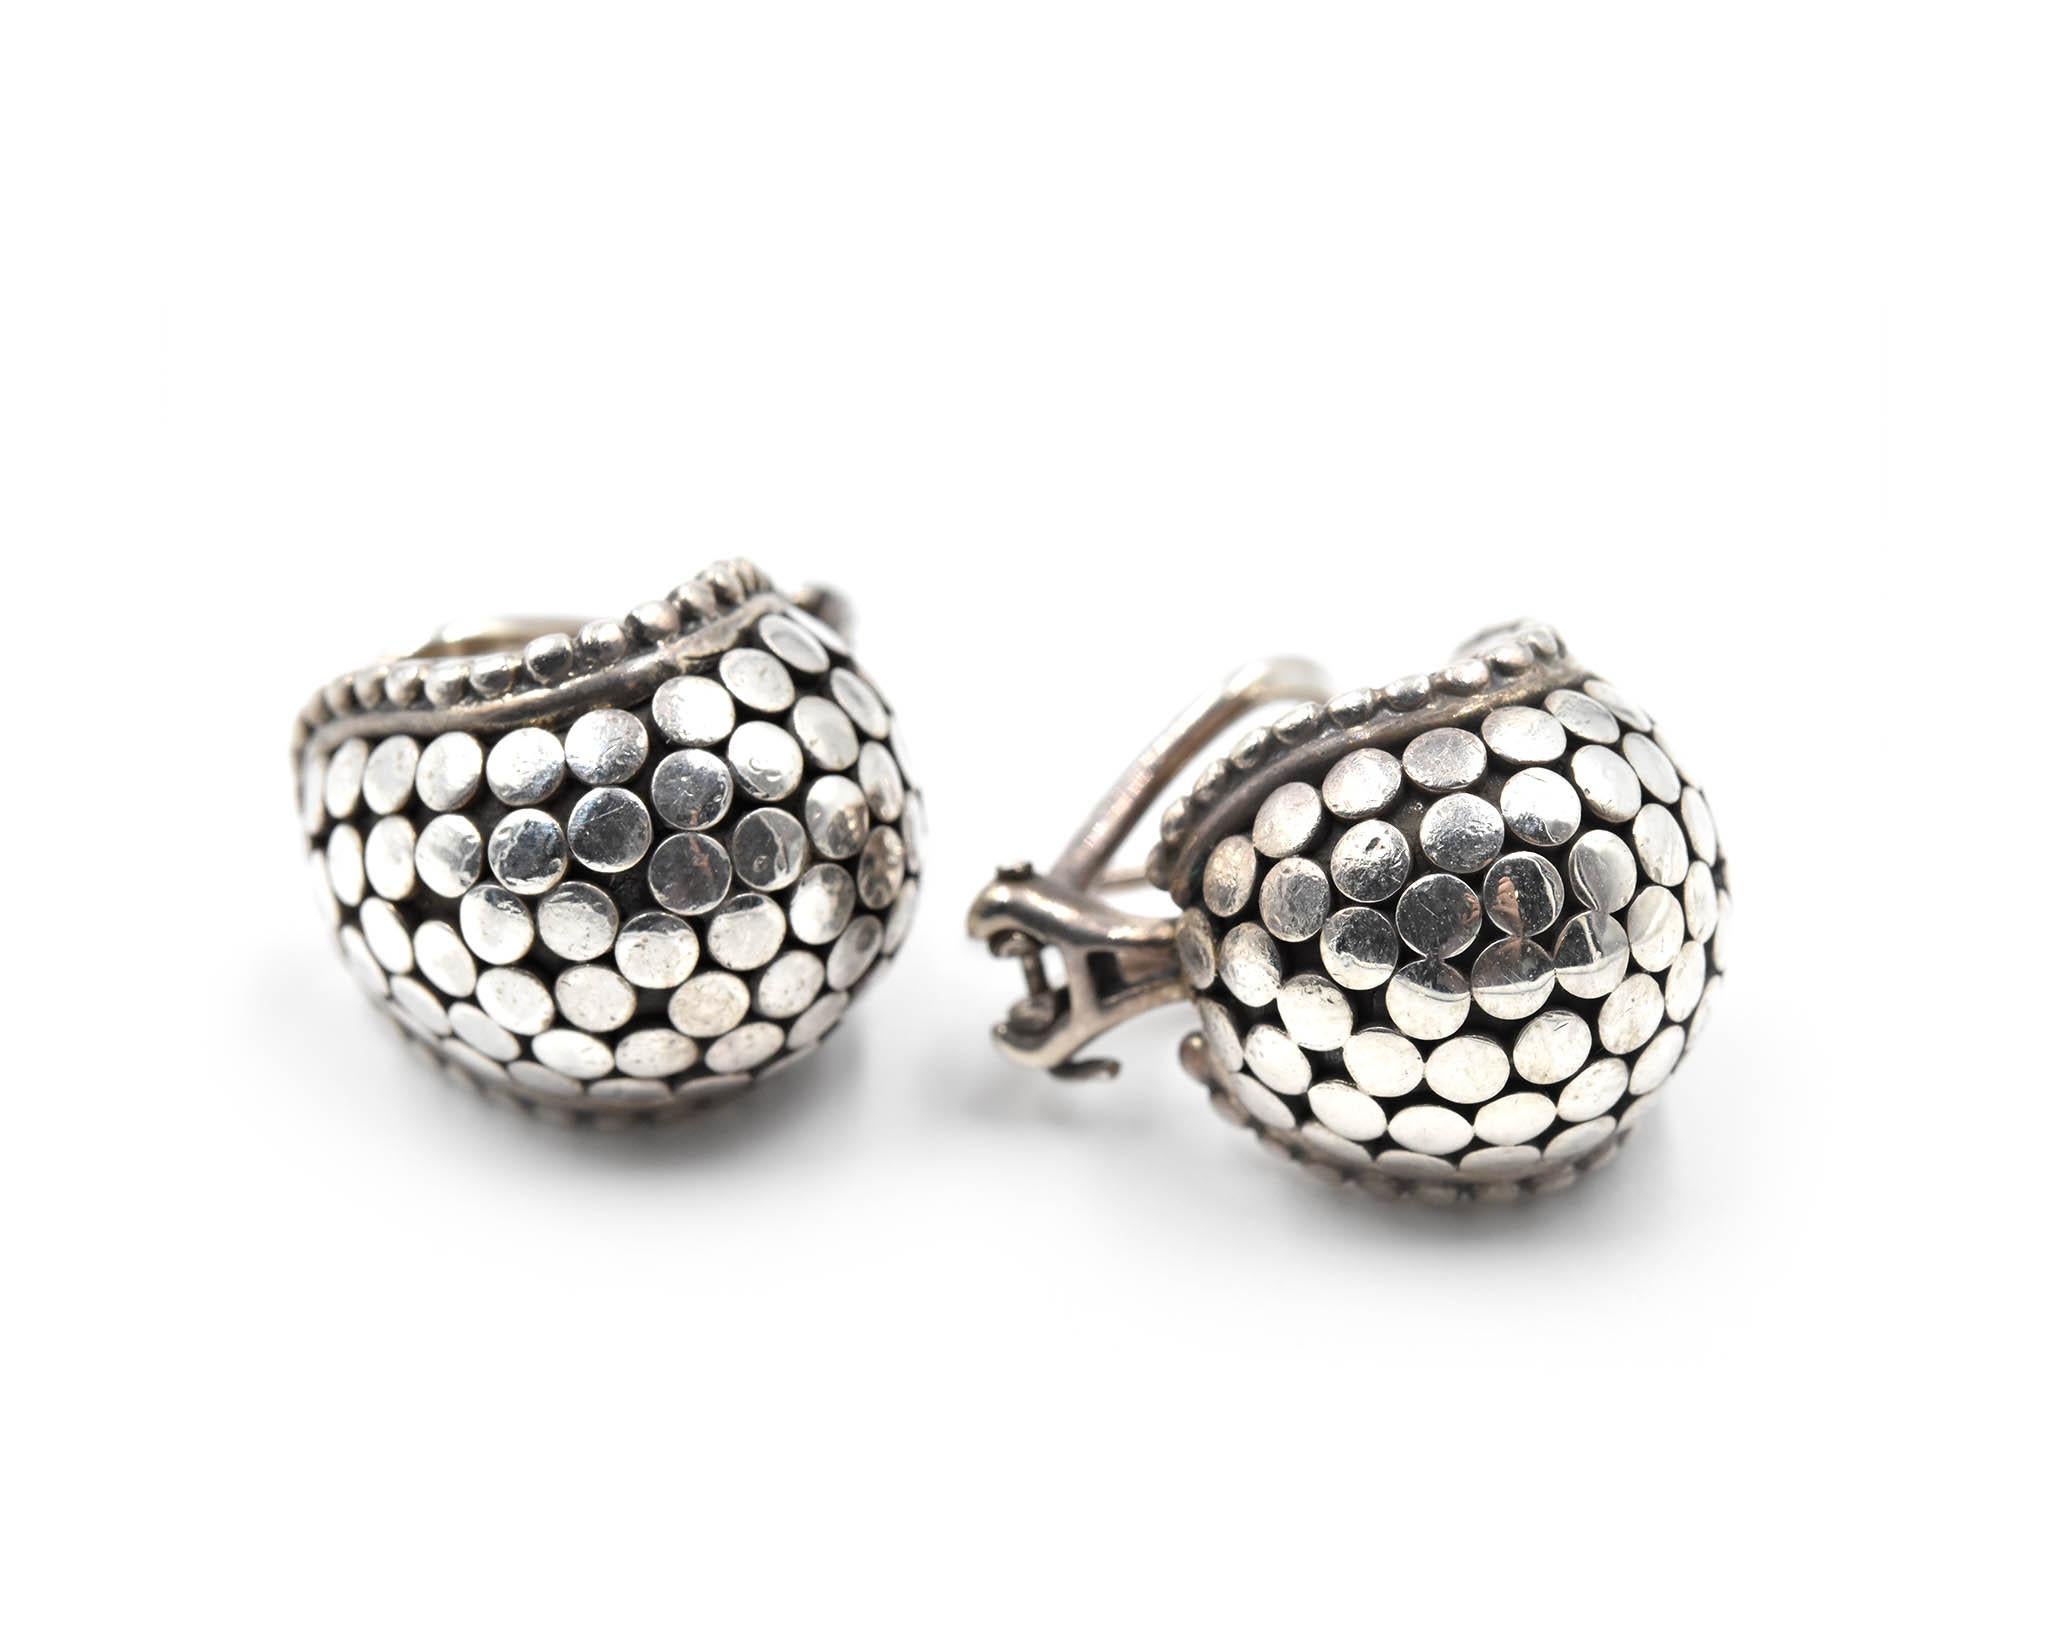 Designer: John Hardy
Material: sterling silver
Dimensions: each earring is 1/2-inch long and 1/2-inch wide
Fastenings: omega backs
Weight: 16.54 grams
Retail: $595.00
